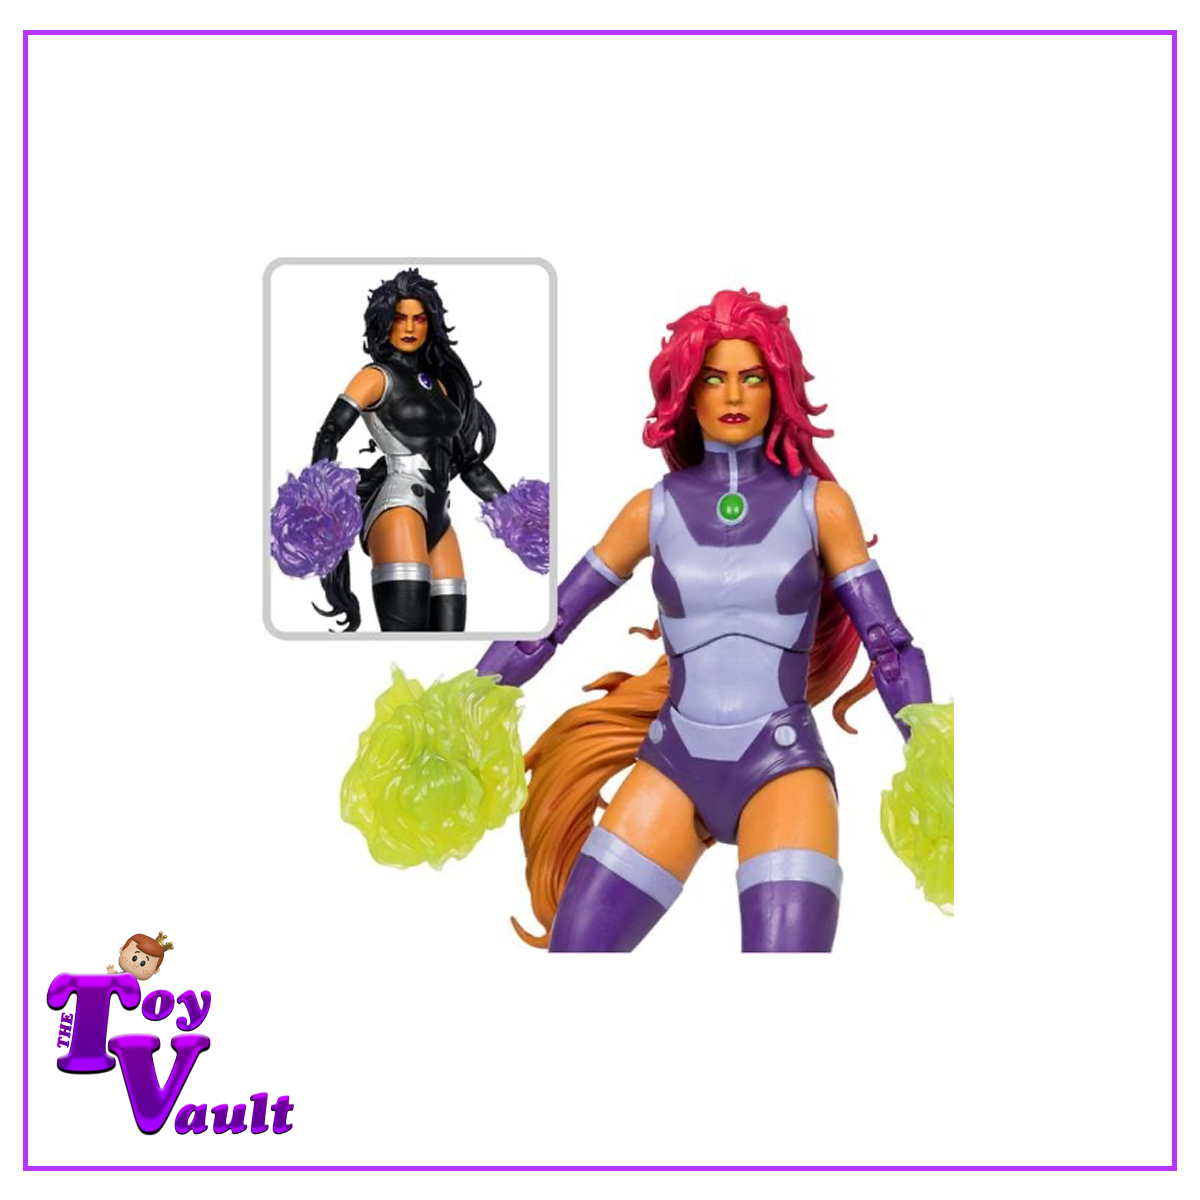 McFarlane Toys DC Heroes Rebirth Collector Edition Starfire 7-inch Action Figure Preorder